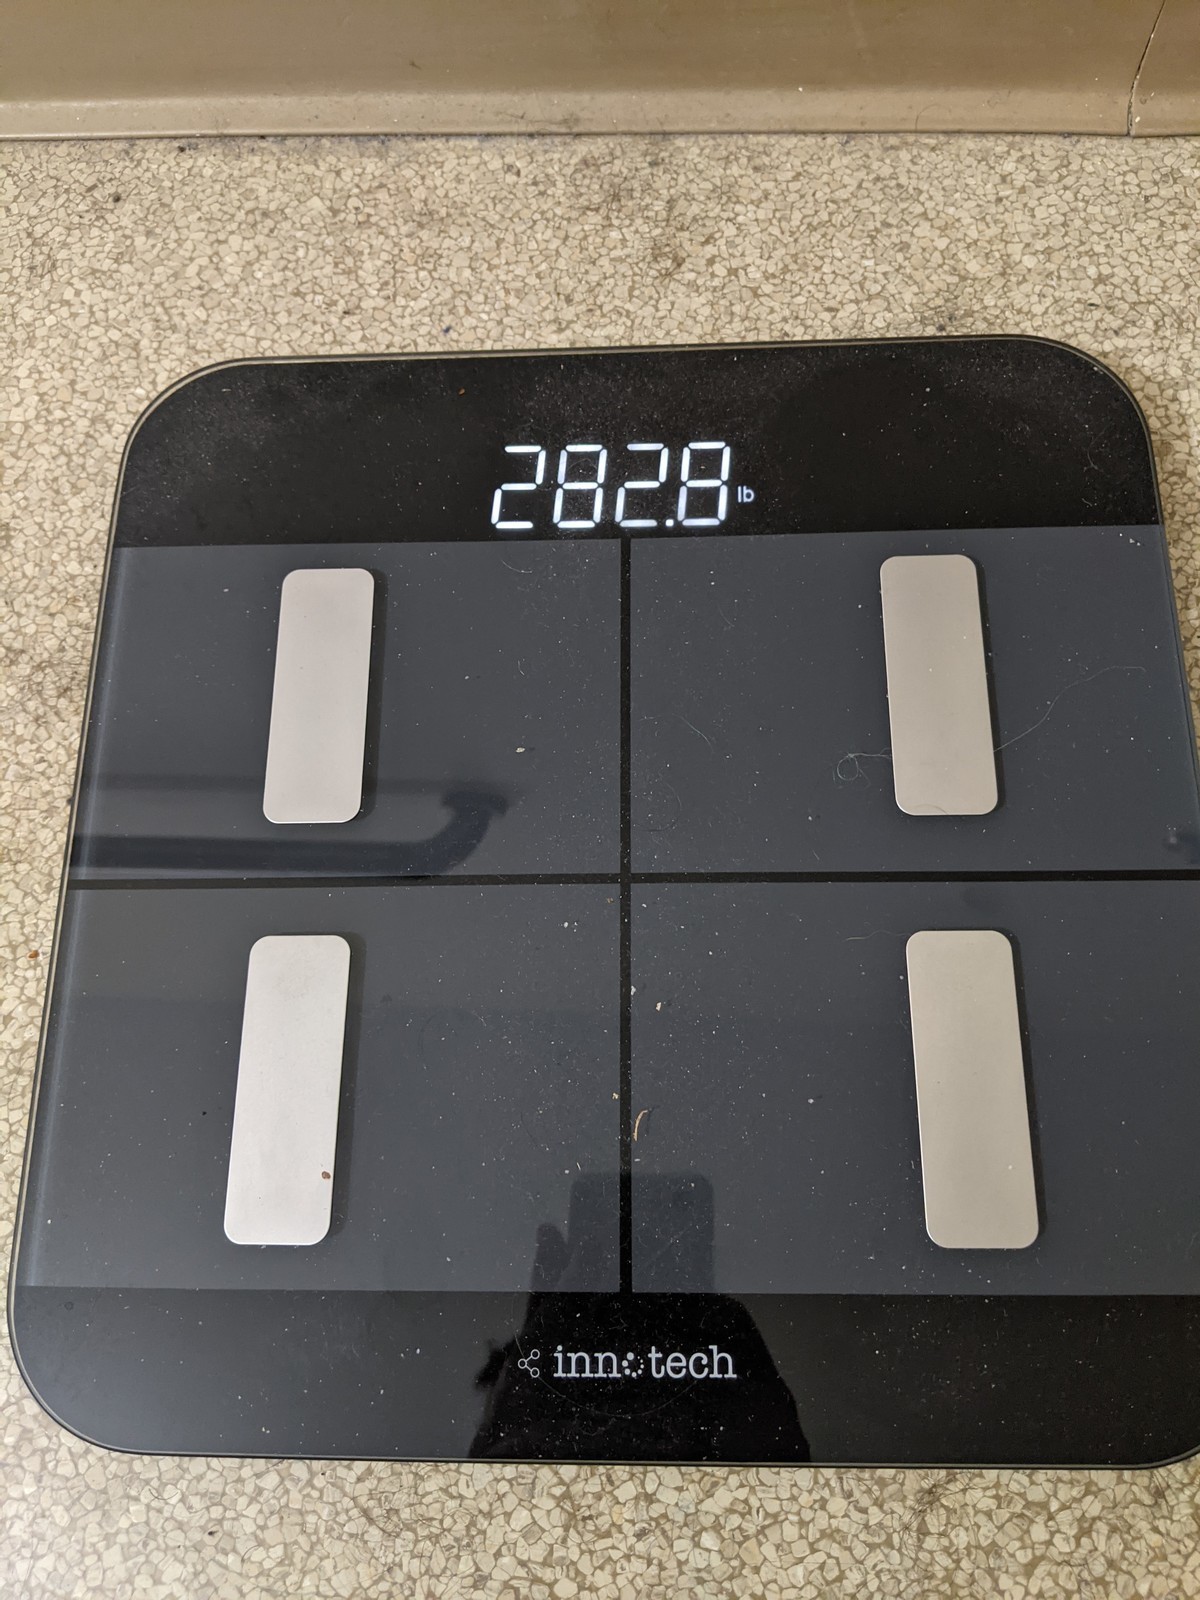 negative Goose. join list: WeightlossProgress (165 subs)Mention History Day late on the update but here we are. Still having issues dropping under 280, but I'm 